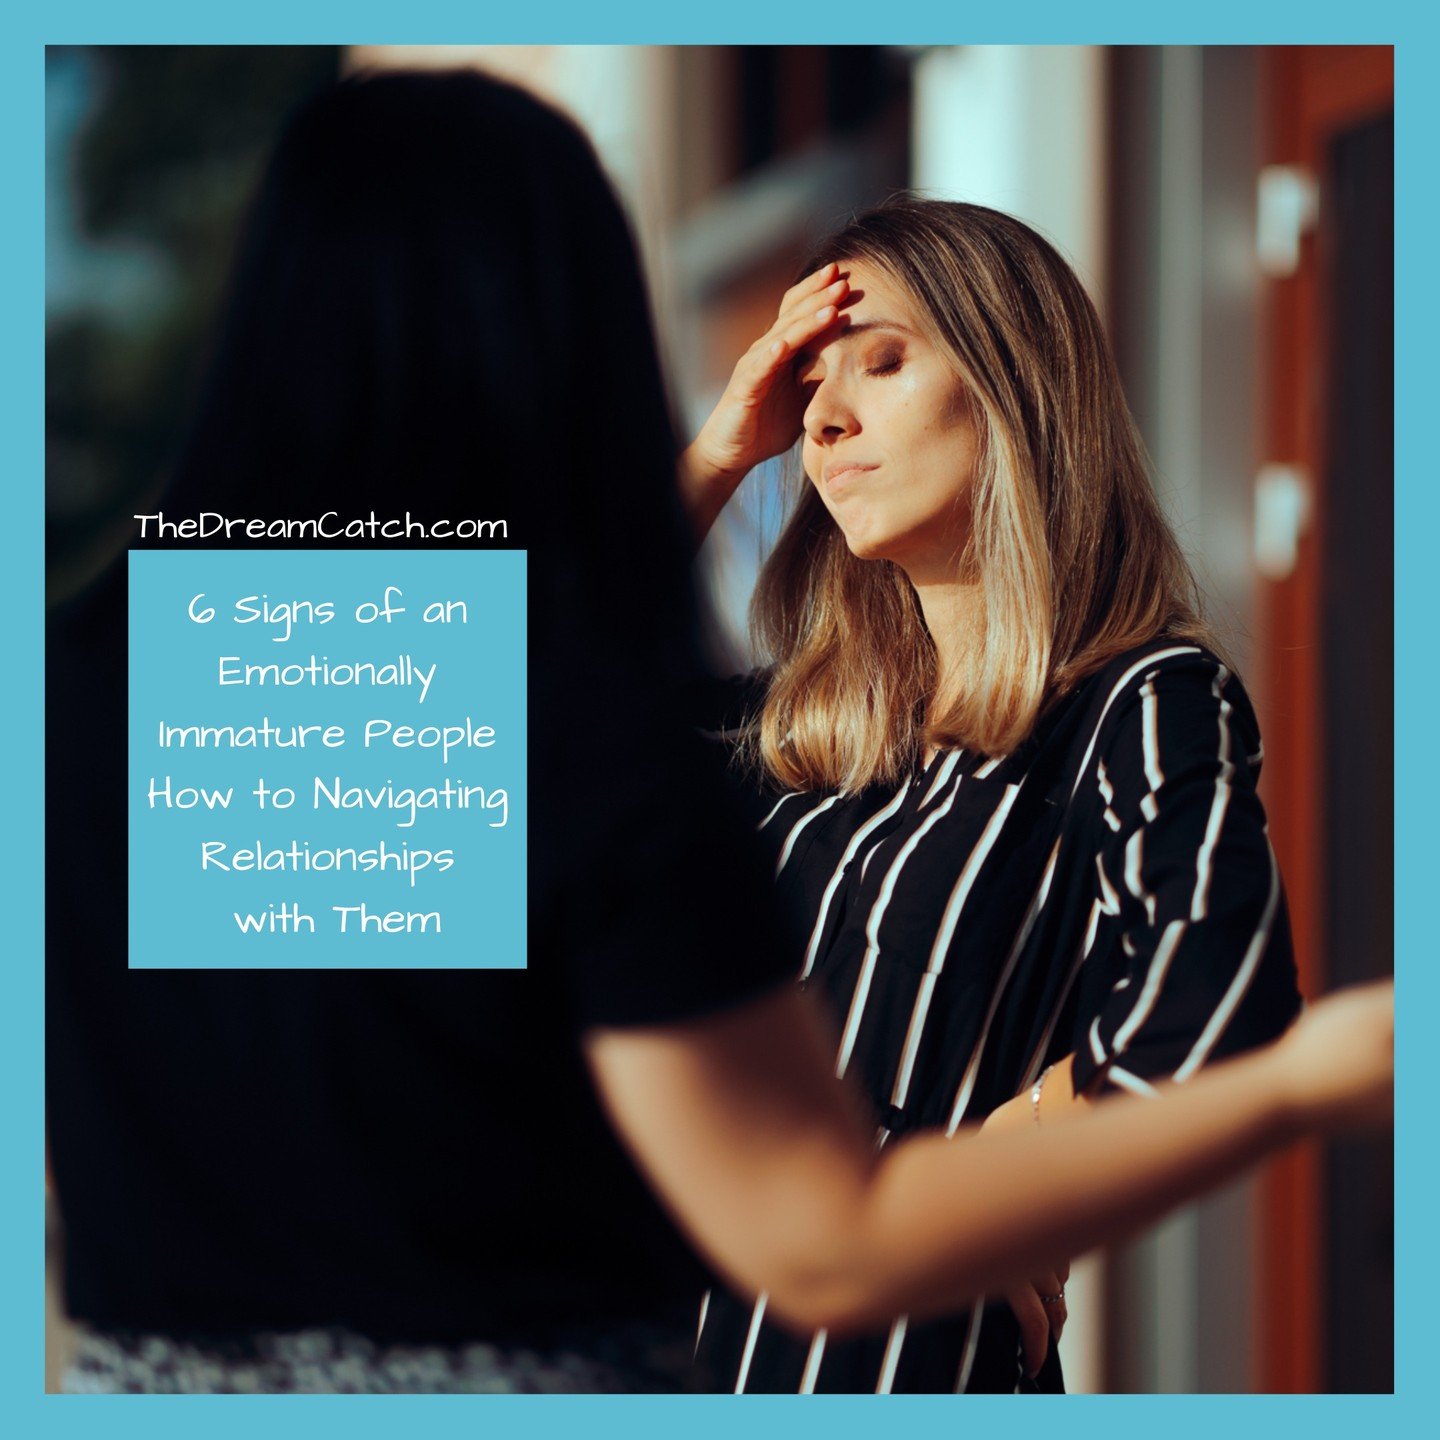 Being in a relationship with emotionally immature people can be draining and frustrating. Their inability to regulate their own feelings and understand the emotions of those around them can break down communication and harmony in the connection. 

Re